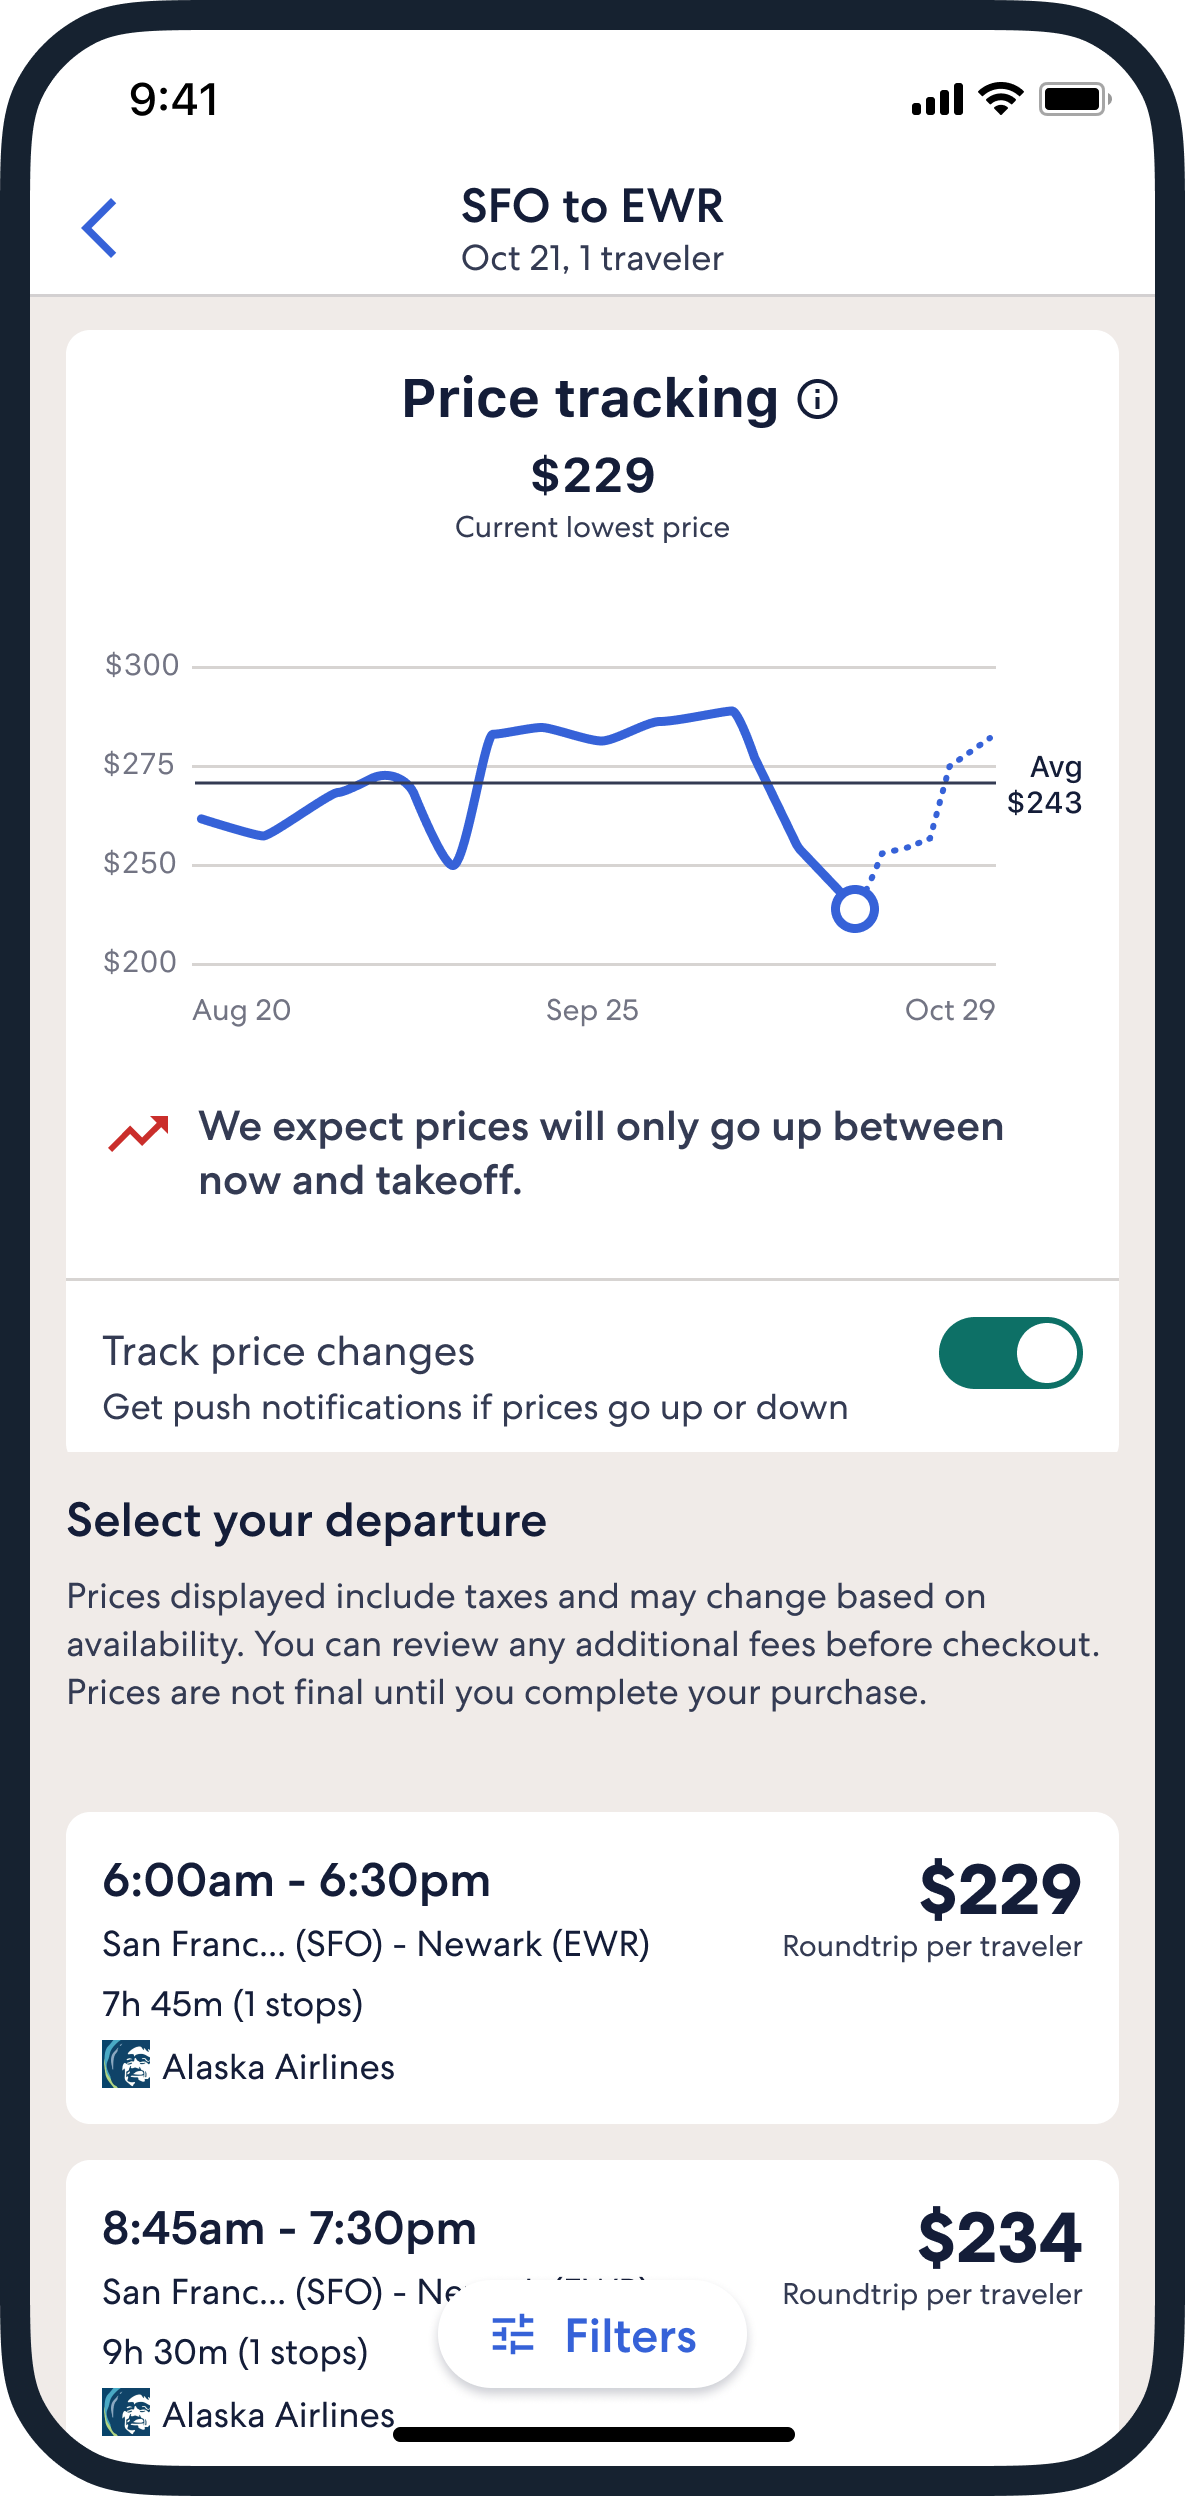 Expedia’s Price Tracking & Predictions feature uses decades of proprietary flight shopping data, AI, and machine learning to compare today’s flight price with historical price trends to help travelers make an informed decision on the best time to book their chosen route.